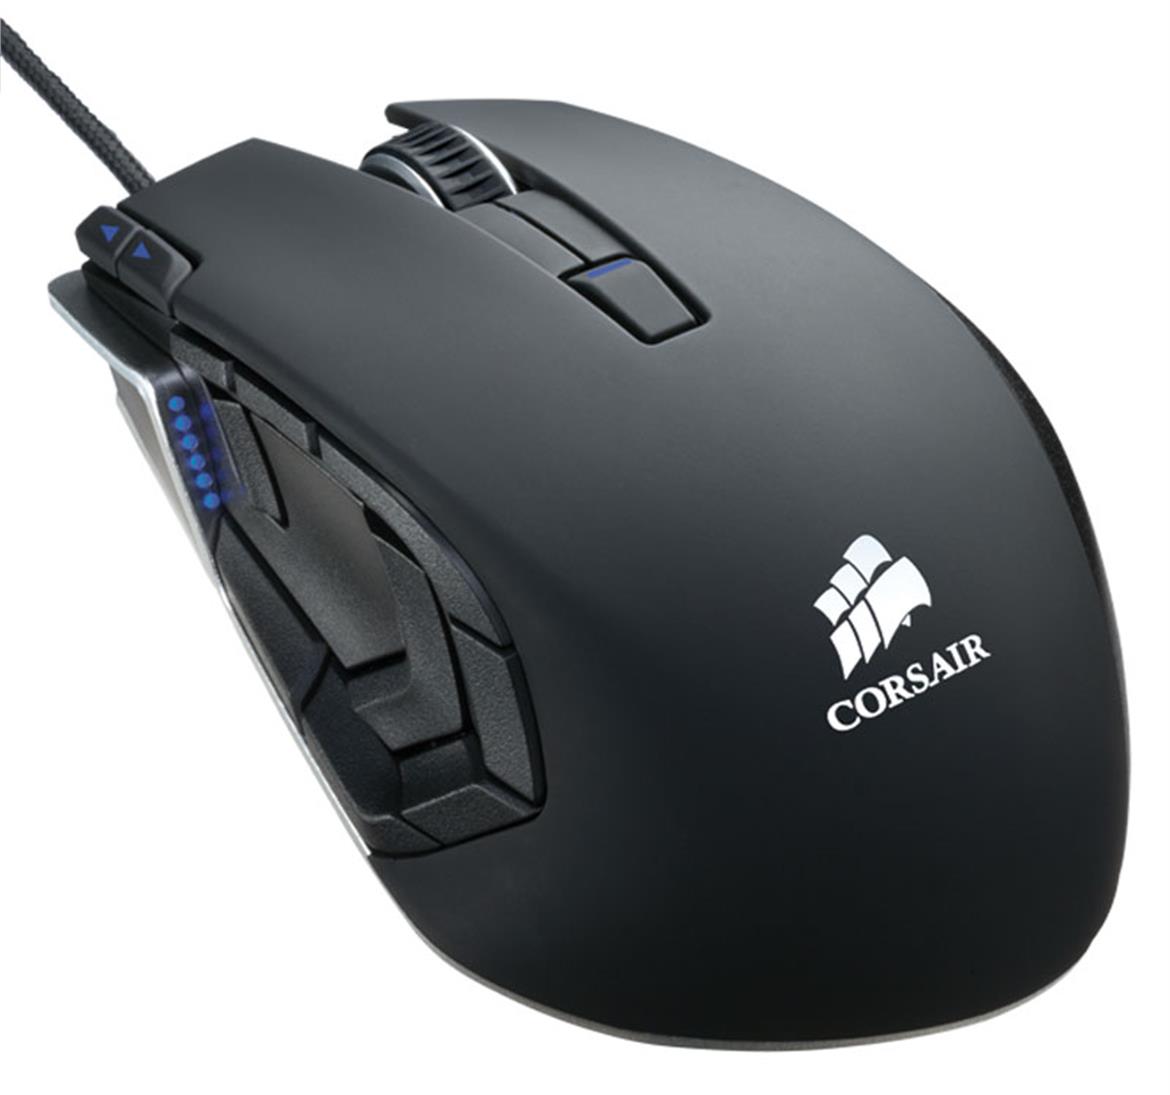 Corsair's New Vengeance Gaming Keyboards And Laser Gaming Mice Debut